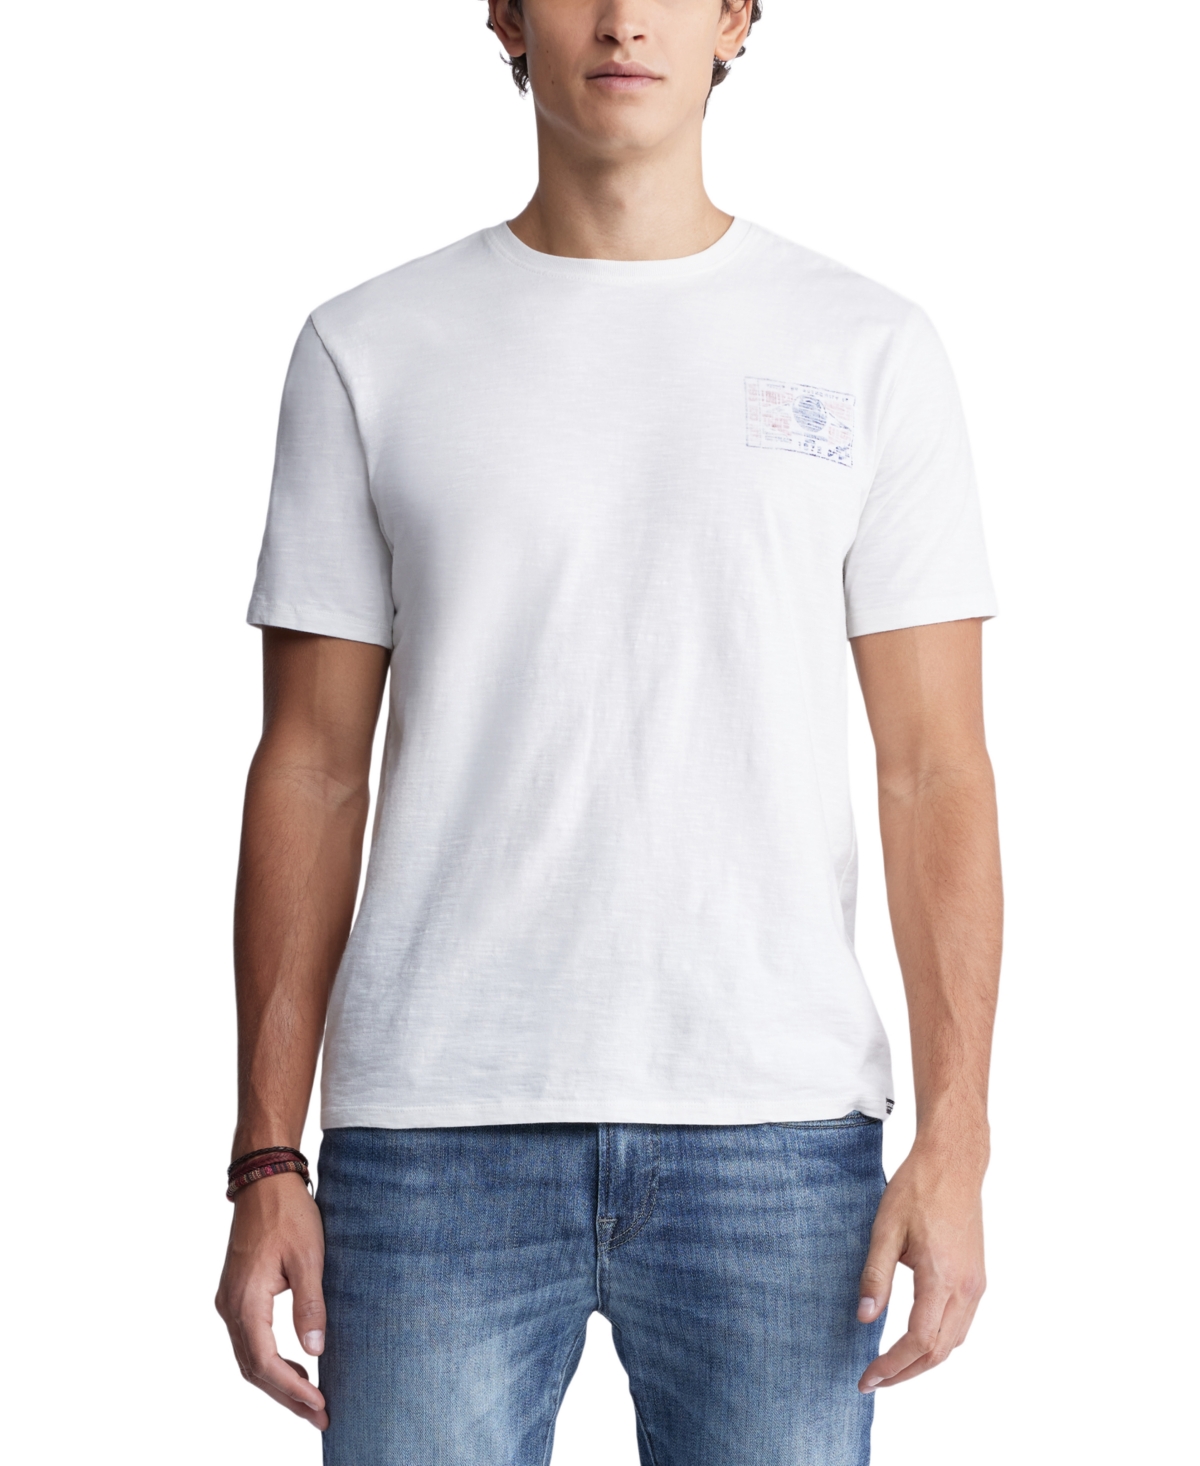 Men's Tacoma Relaxed-Fit Short Sleeve Graphic T-Shirt - Milk